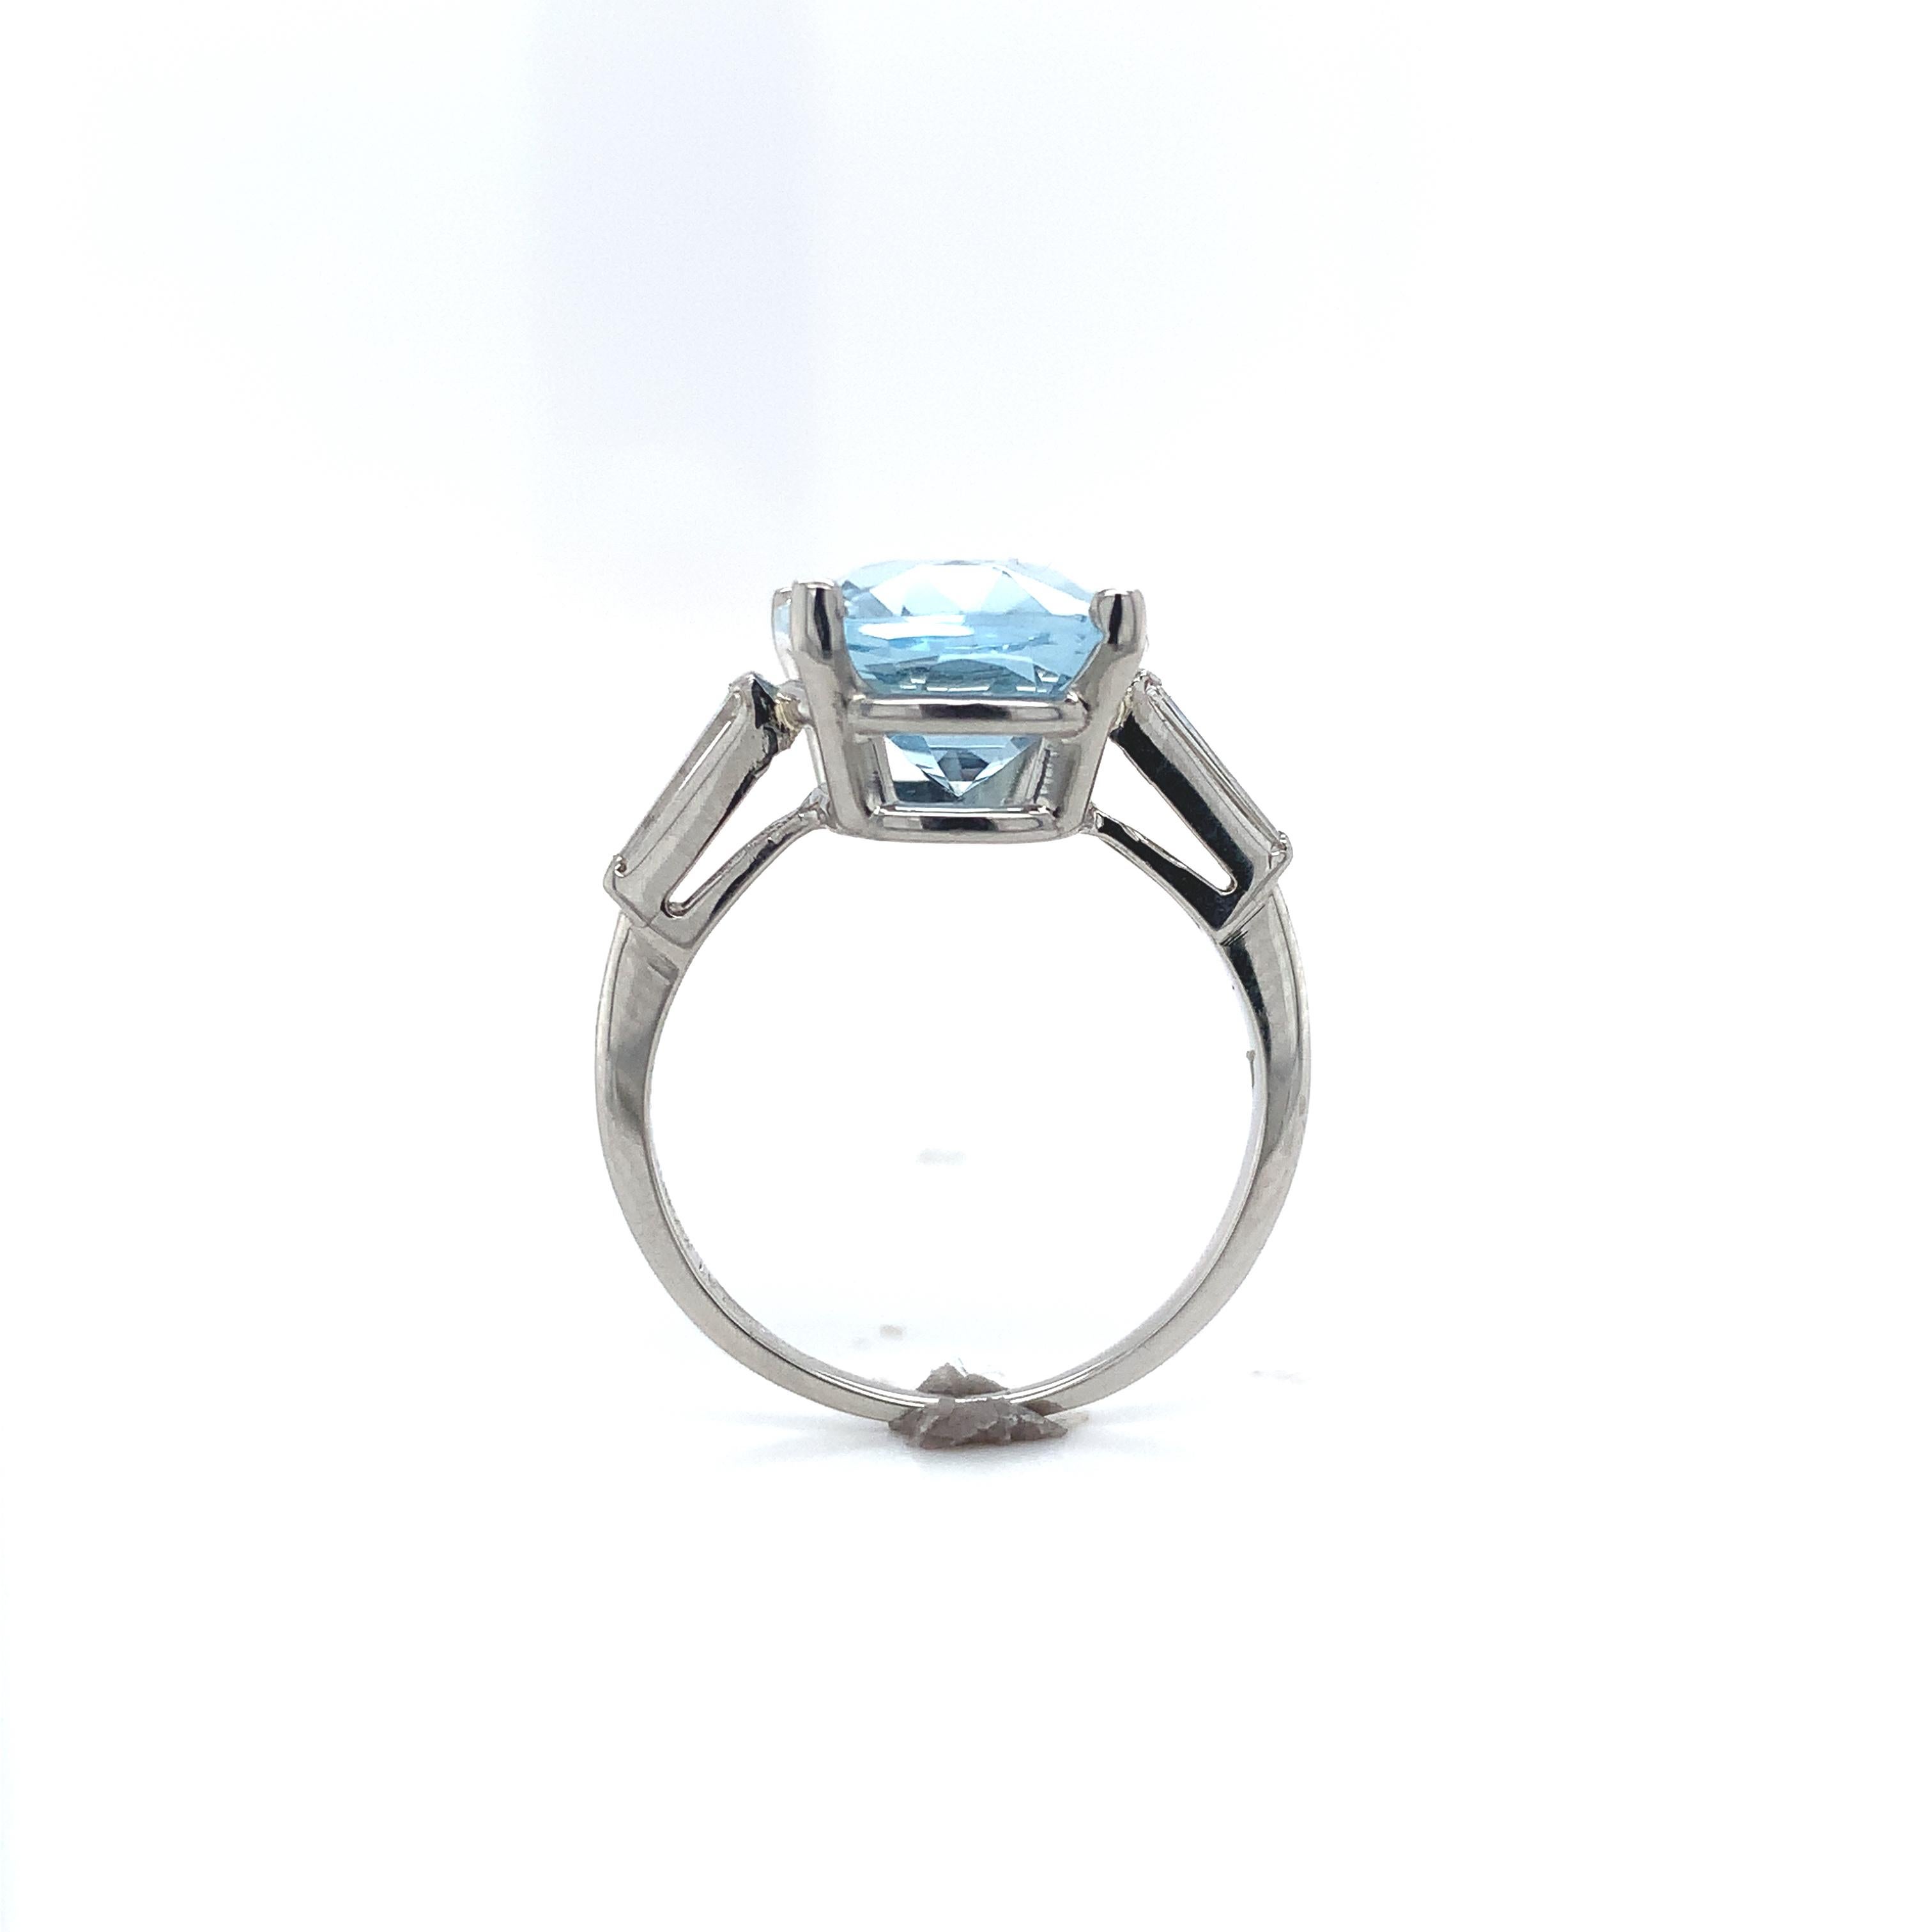 Platinum 4.71 carat aquamarine and diamond ring. The light blue aquamarine is a beautiful specialty antique cushion cut measuring about 12.3mm x 9.8mm. There are 2 long diamond baguette accents measuring about 5.5mm x 2mm. The ring fits a size 6.75